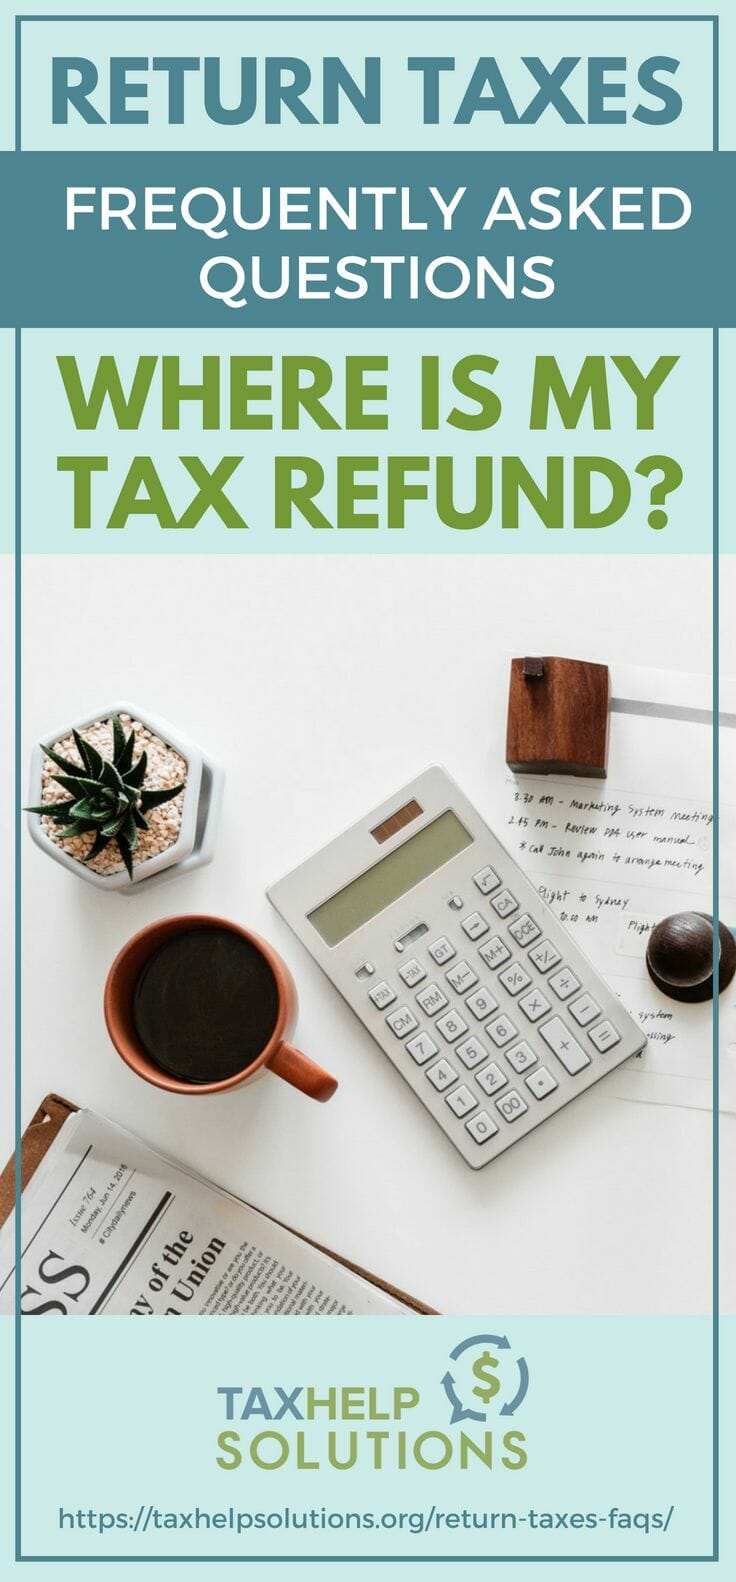 Return Taxes Frequently Asked Questions | Where Is My Tax Refund? https://taxhelpsolutions.org/return-taxes-faqs